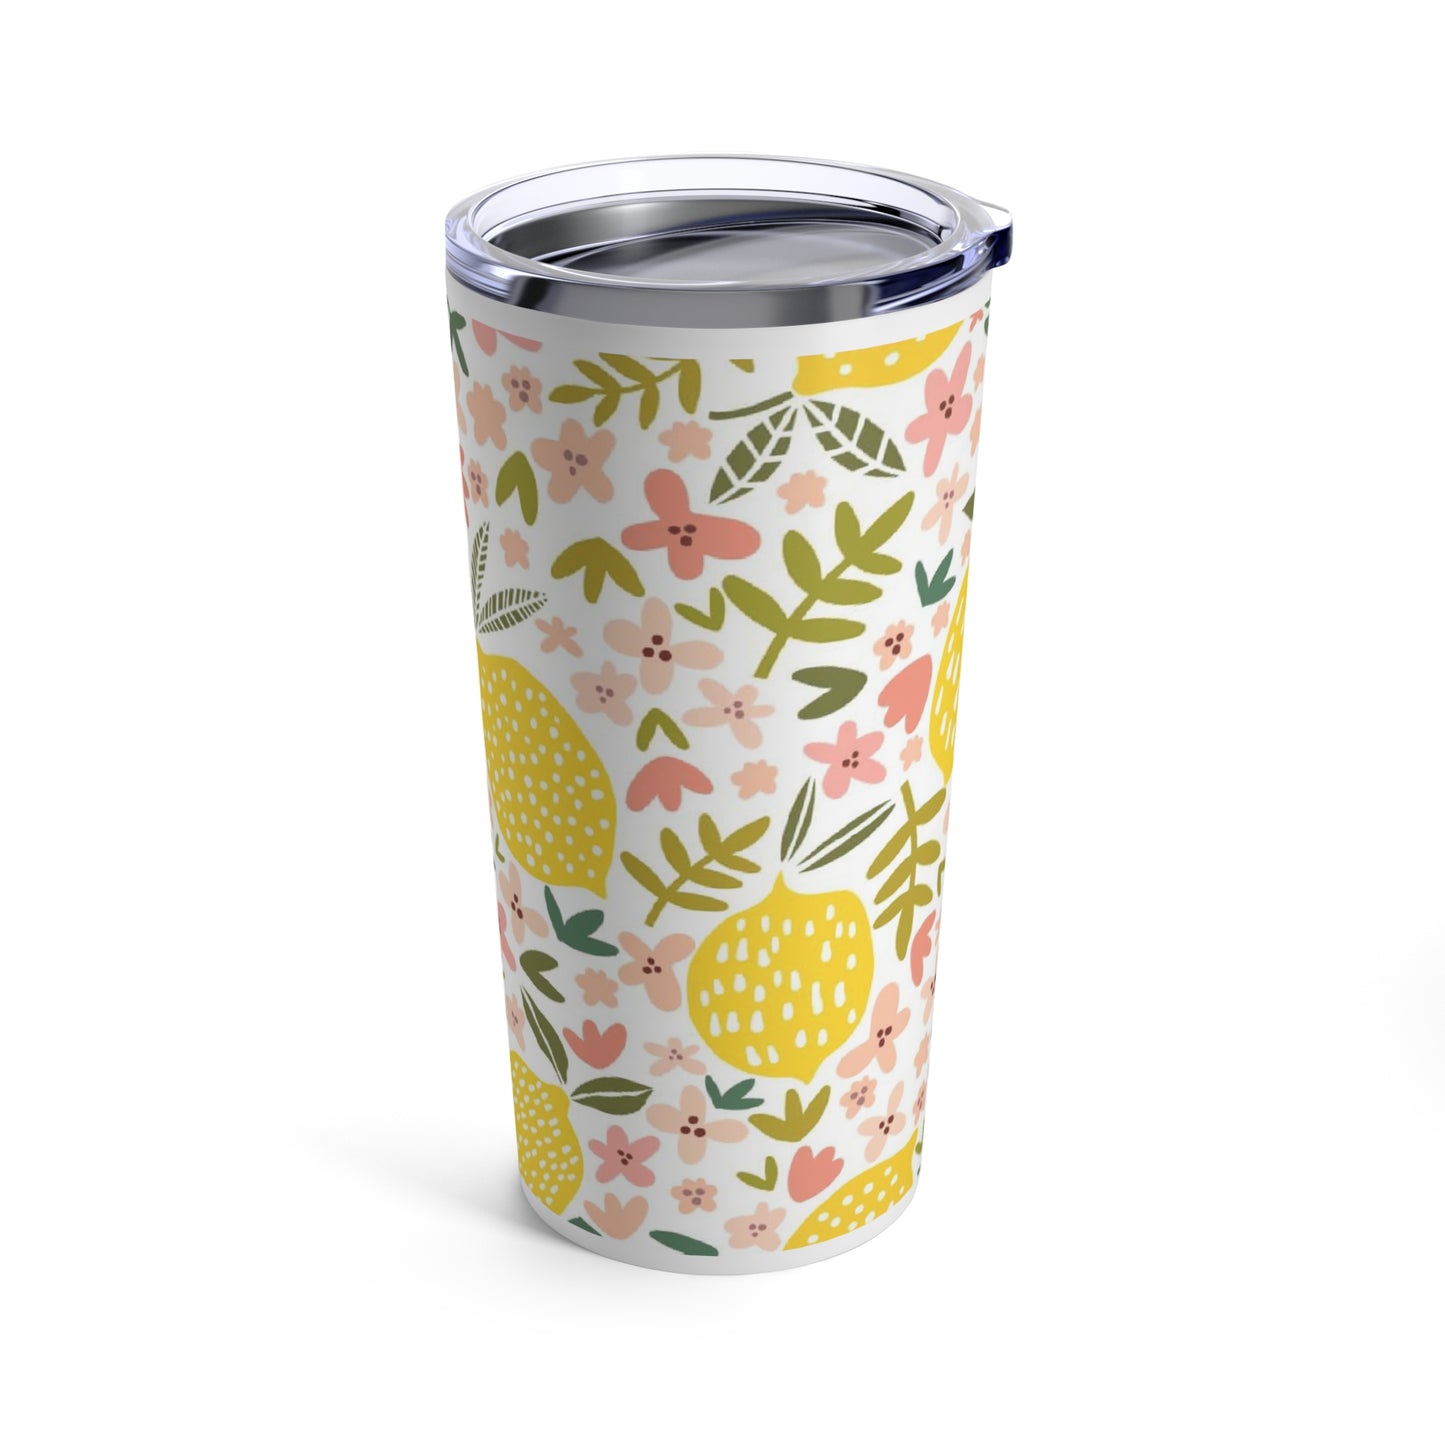 A Pink Lemon Tumbler from Printify with lemons and flowers on it.